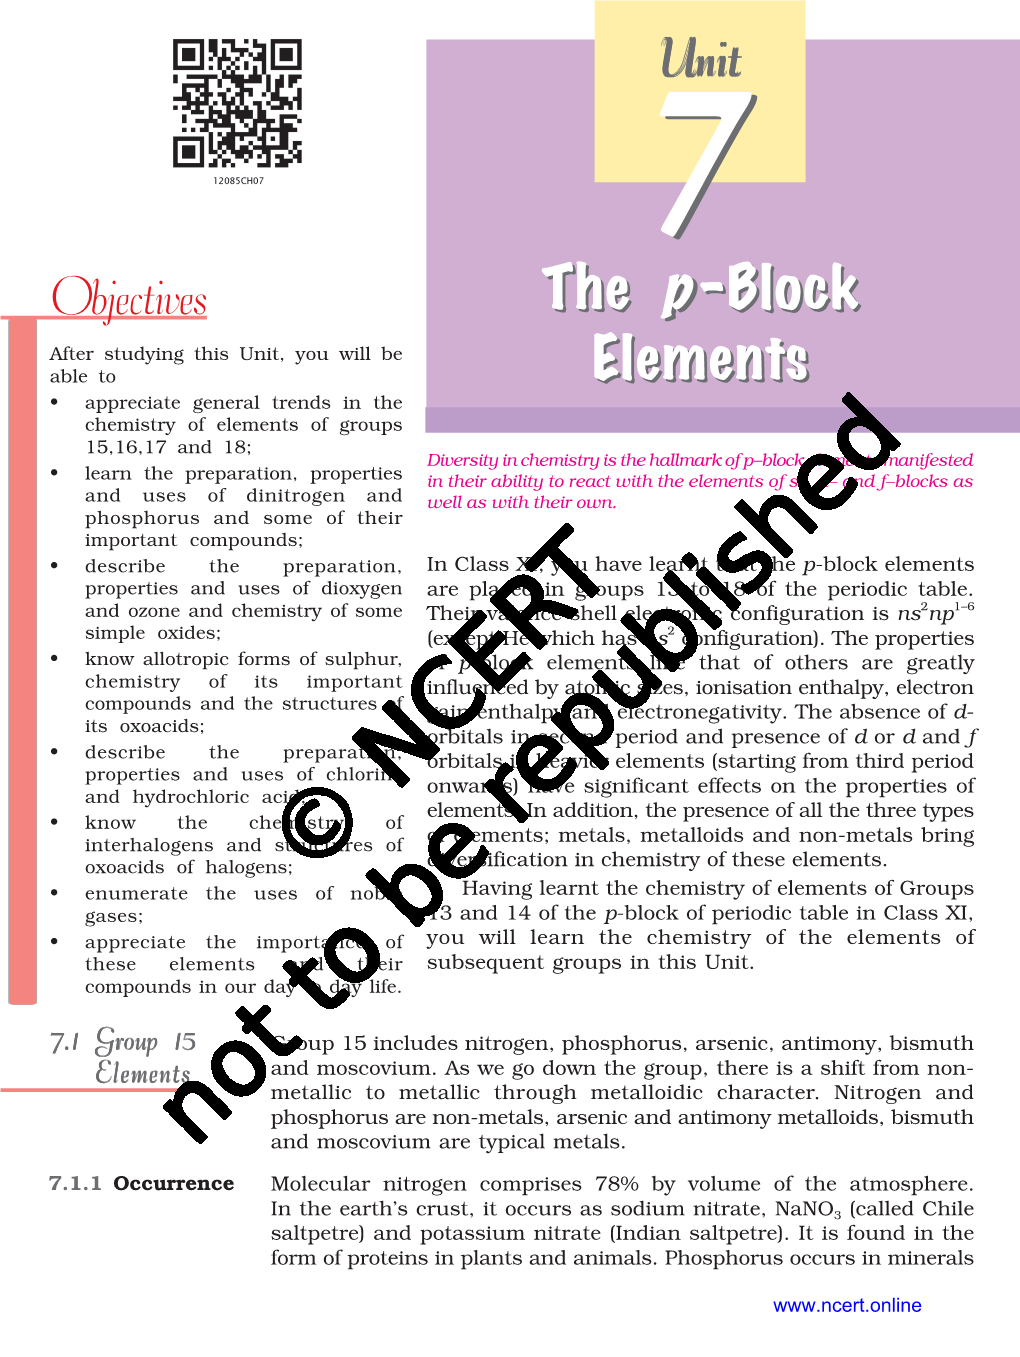 The P-Block Elements Properties and Uses of Dioxygen Are Placed in Groups 13 to 18 of the Periodic Table